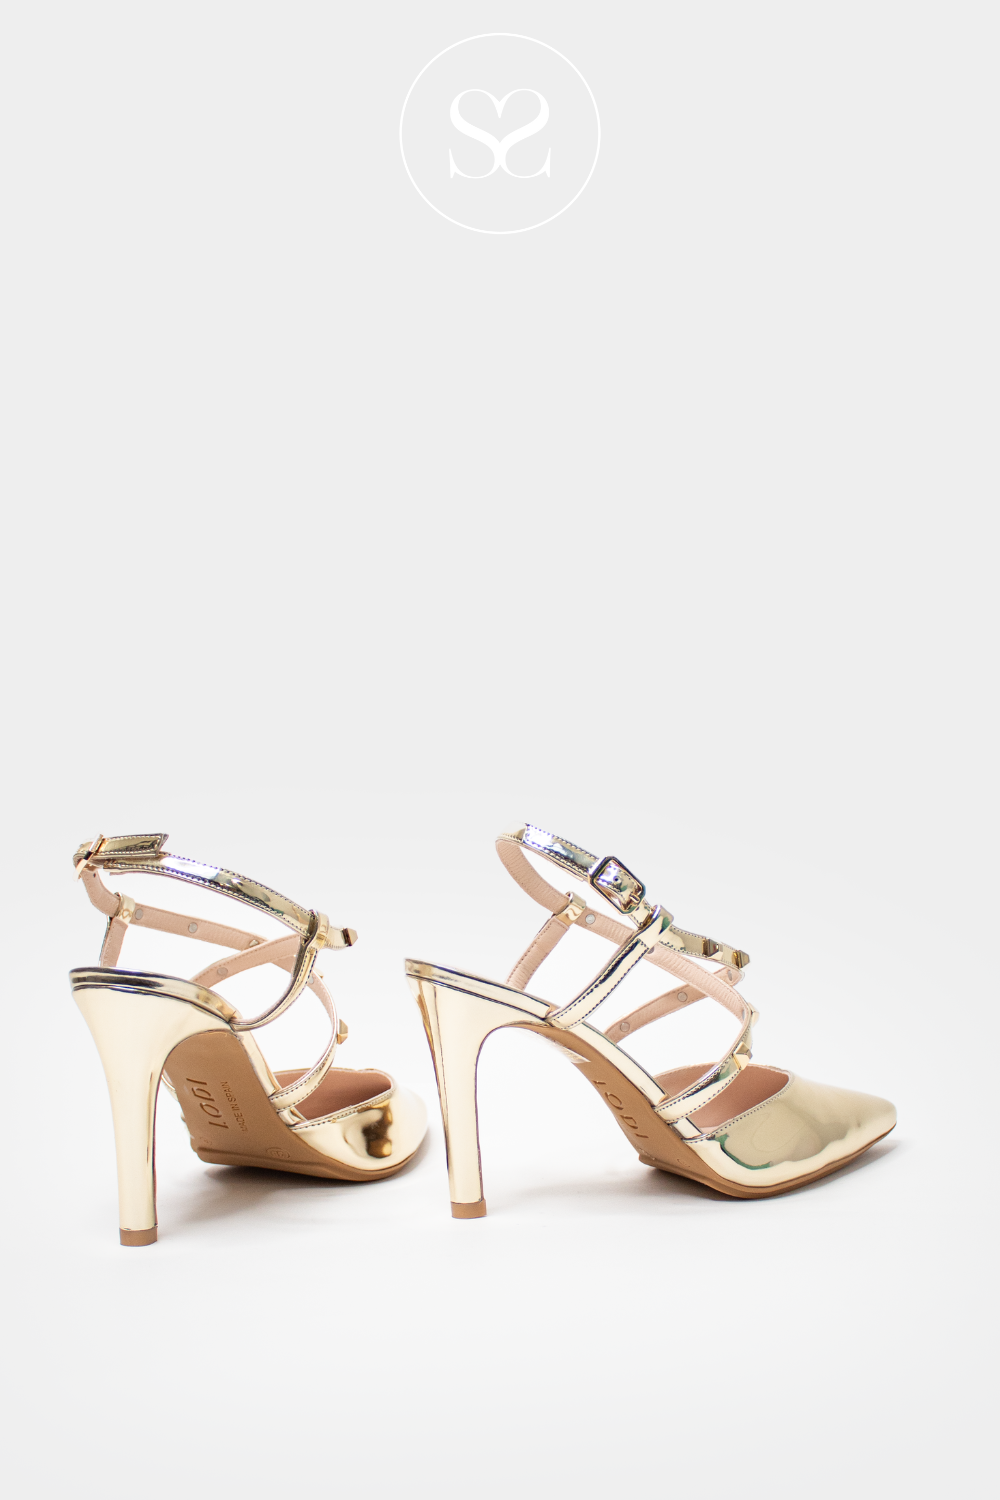 LODI RASIUN GOLD METALLIC MIRRORED POINTED TOE STRAPPY SLINGBACK WITH STUDS ON THE STRAP. HIGH STILETTO HEEL